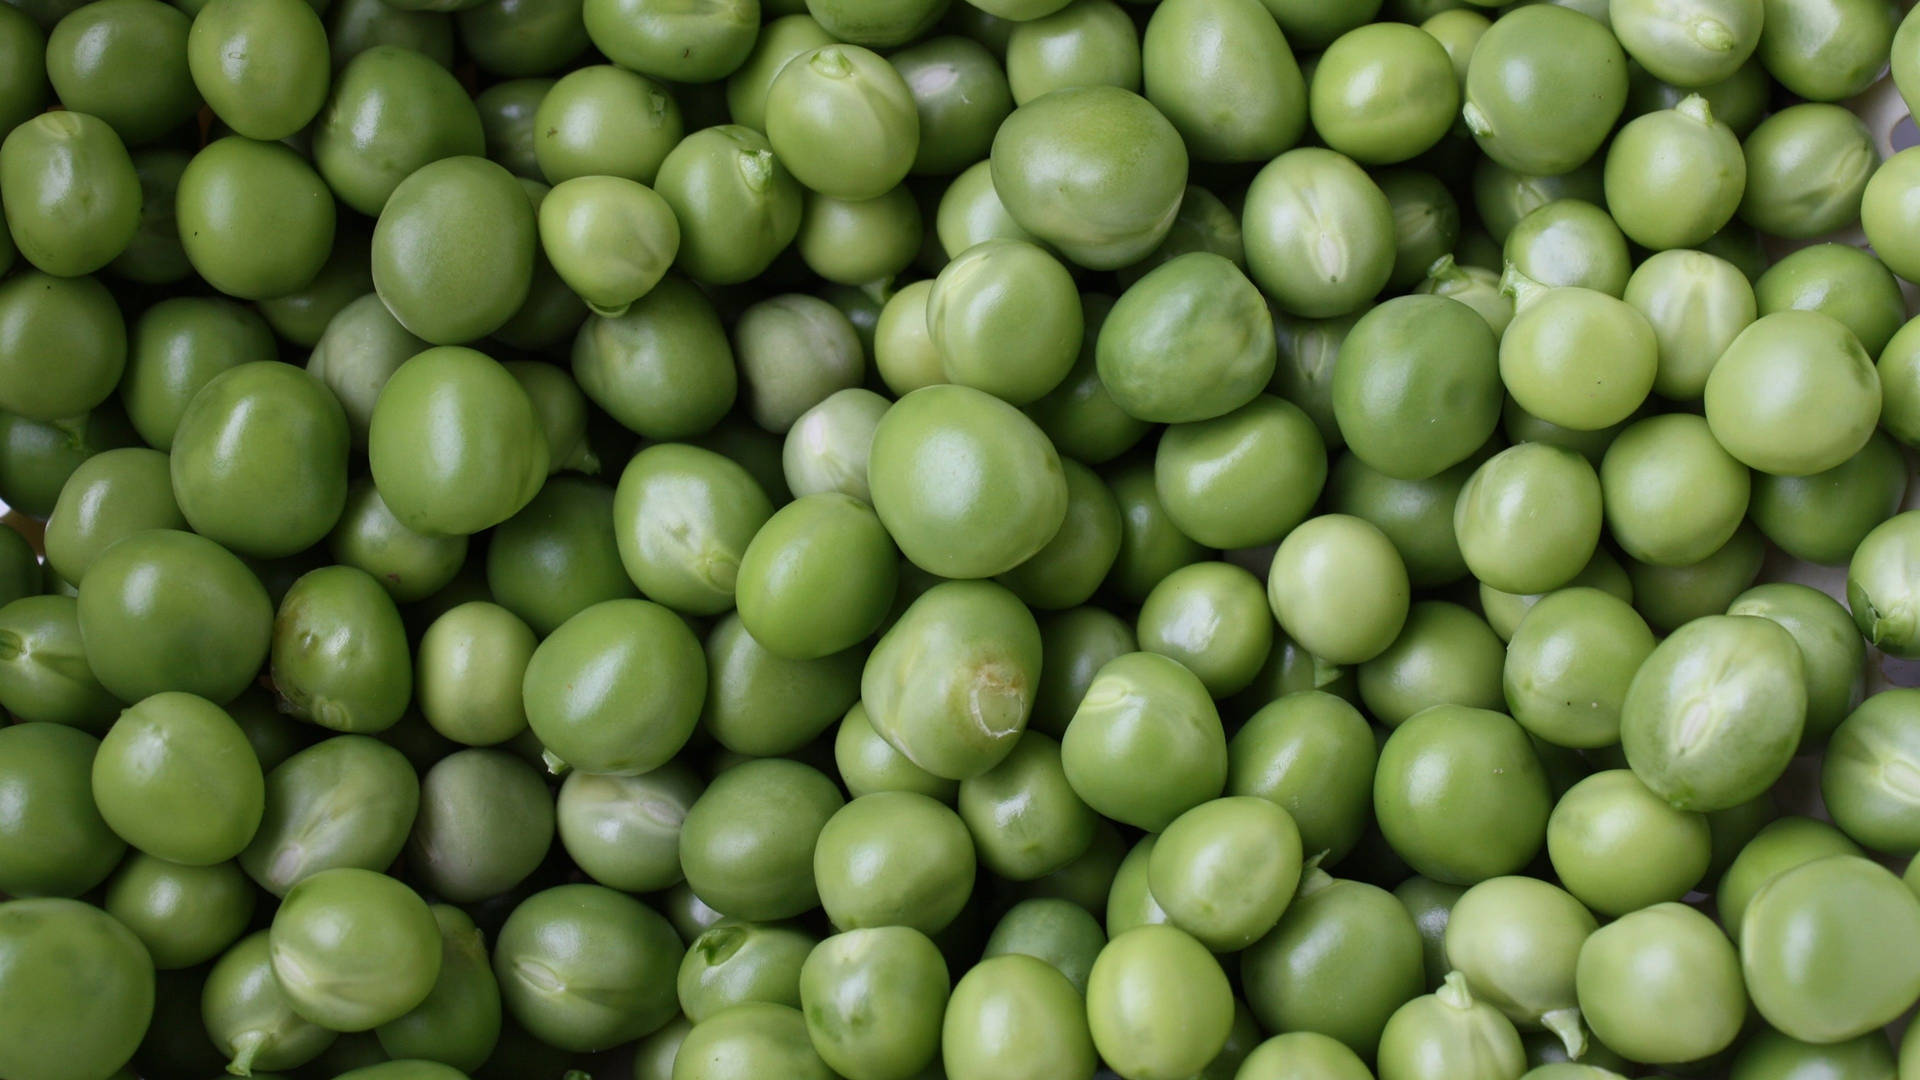 Vibrant and Fresh Green Peas Stacked in a Pile Wallpaper